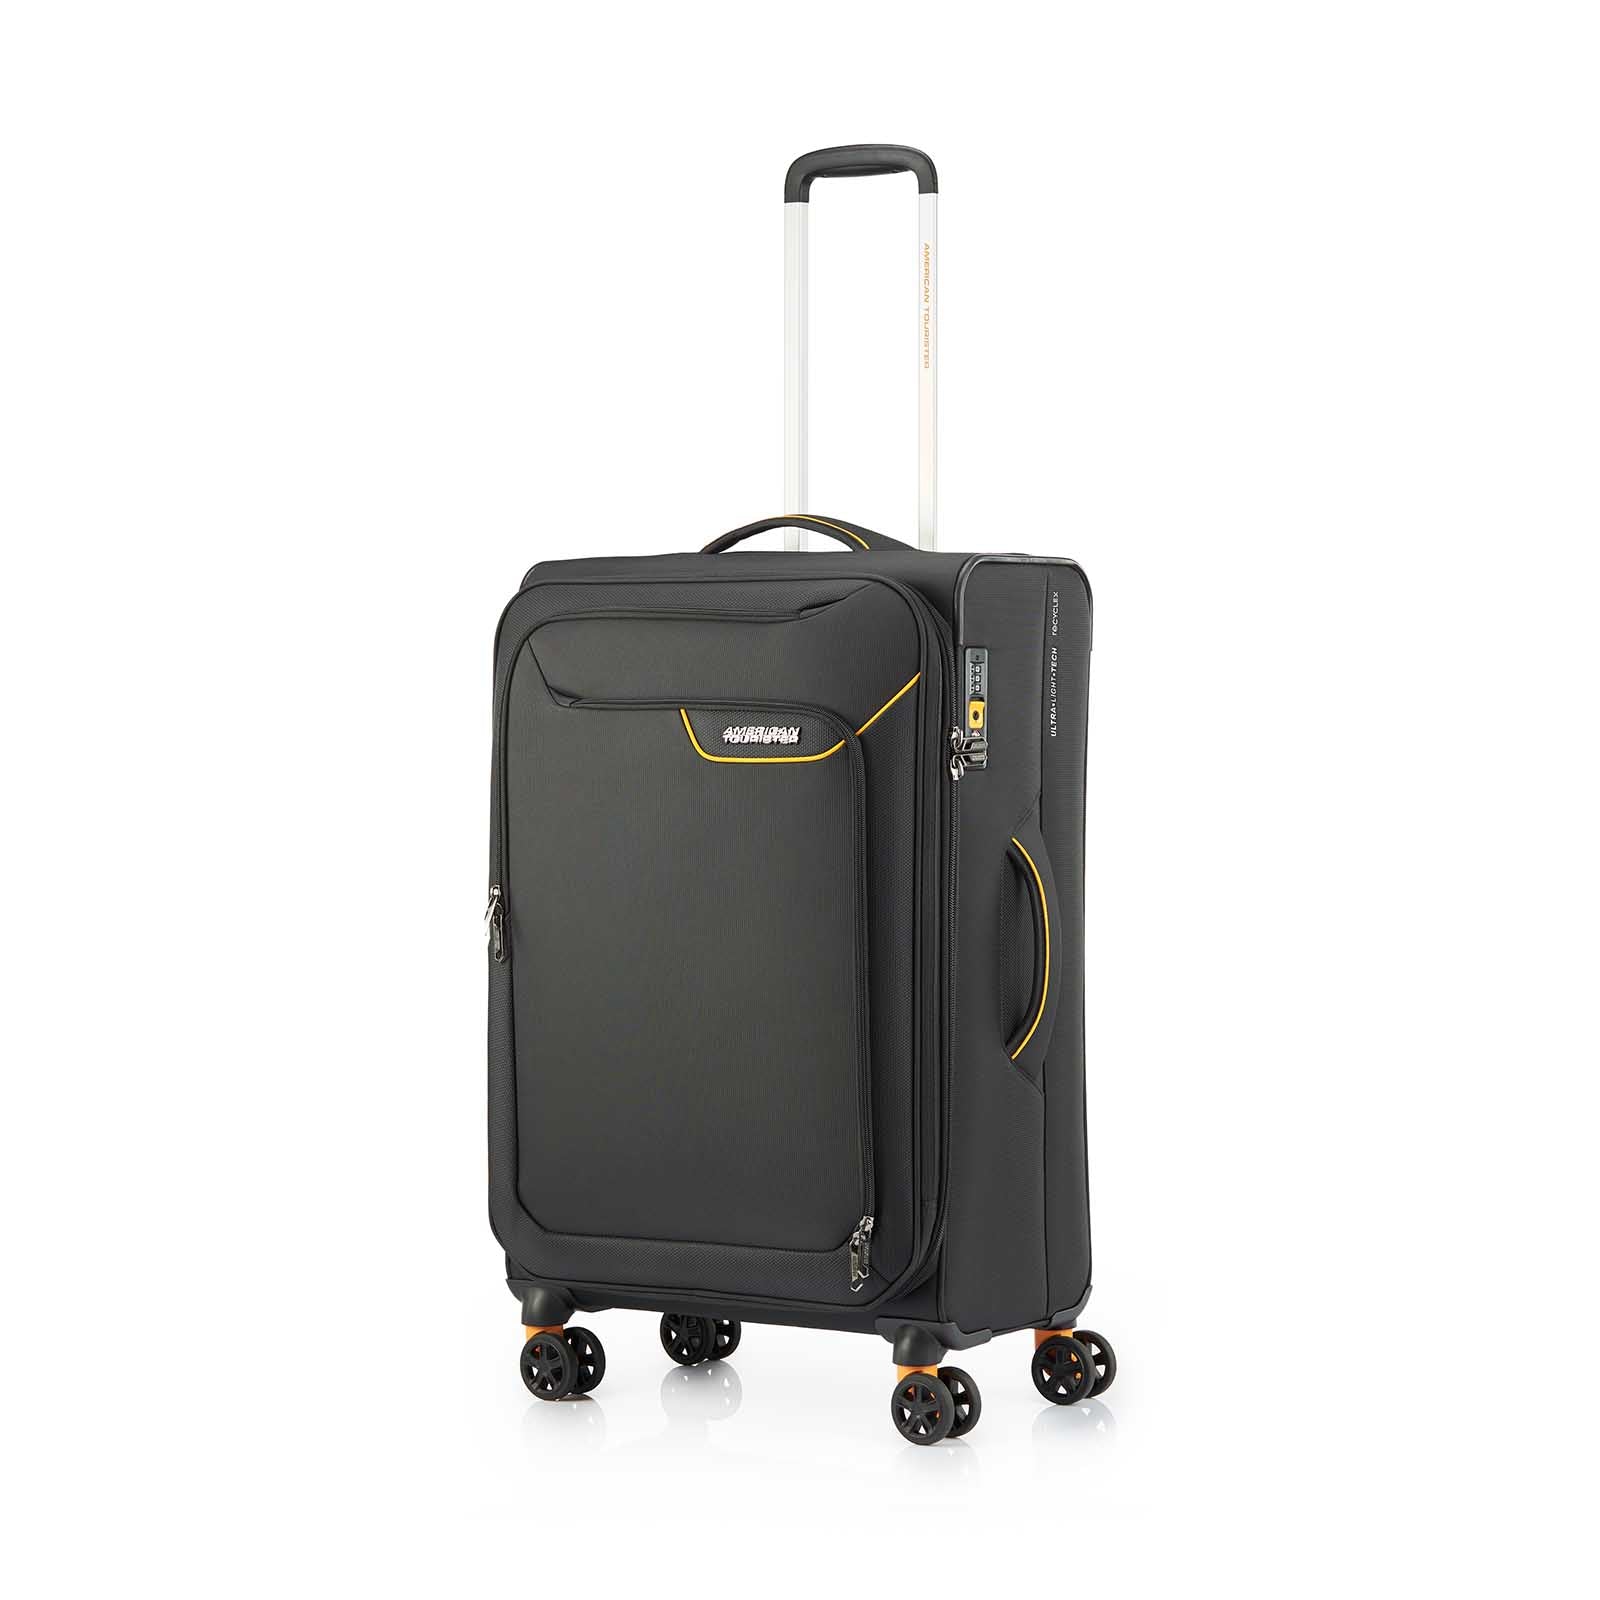 American-Tourister-Applite-4-Eco-71cm-Suitcase-Black-Mustard-Front-Angle